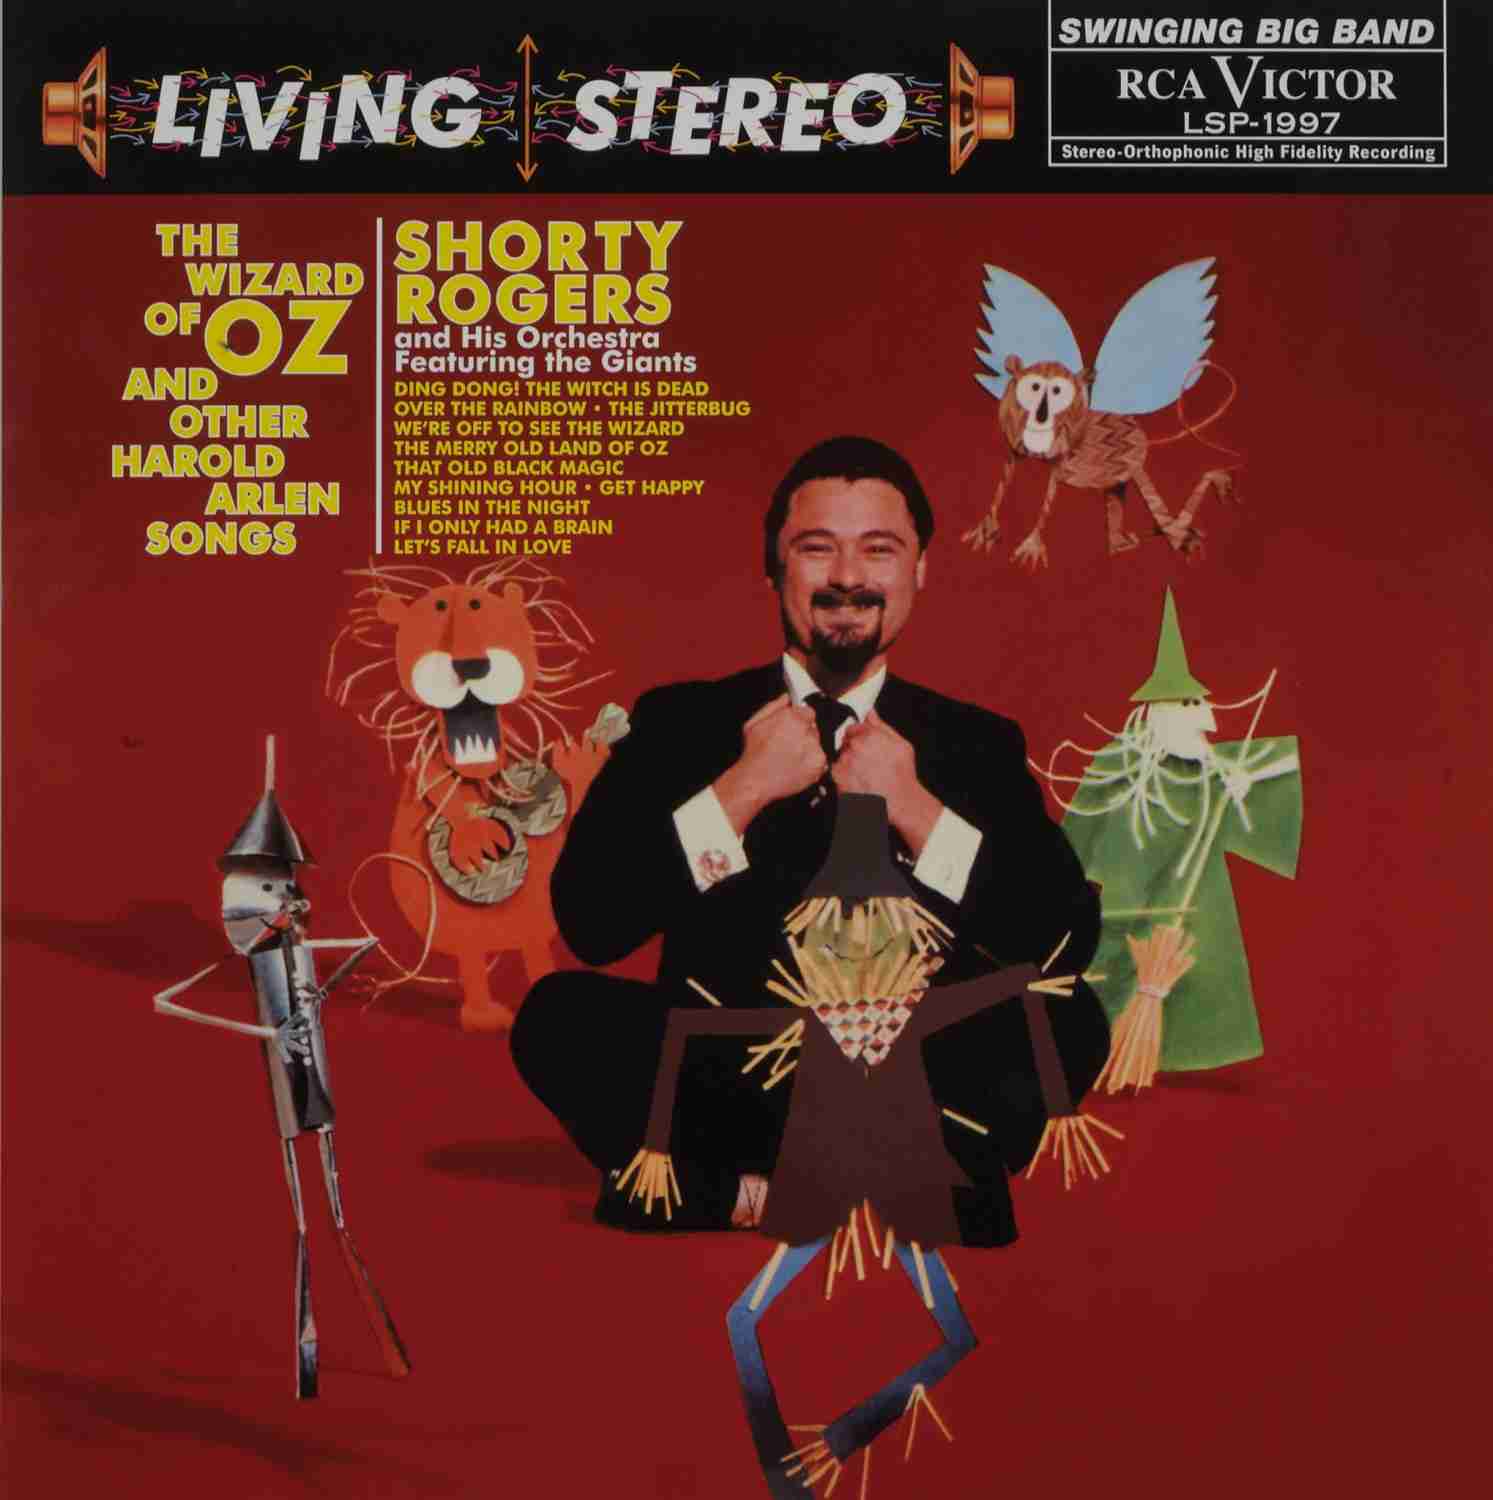 Schallplatte Shorty Rogers and His Orchestra Featuring the Giants - The Wizard of Oz & other Harold Arlen Songs (RCA Victor / Speakers Corner) im Test, Bild 1